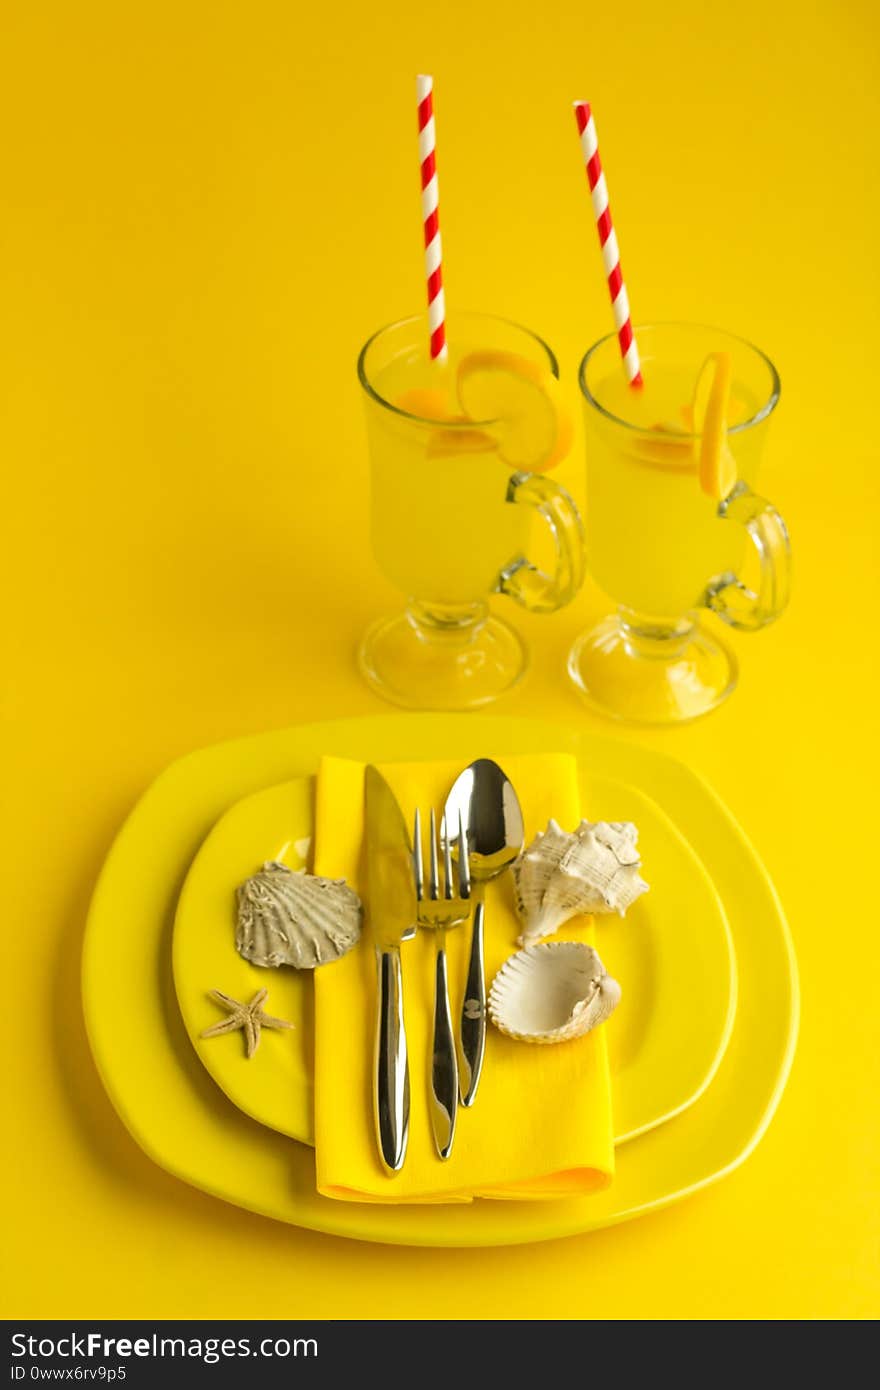 Top view of Setting stylish meal service with yellow porcelain plates,cutlery set,yellow paper napkin and two glass of lemonade on the yellow background with mussel shells.Summer collection. Top view of Setting stylish meal service with yellow porcelain plates,cutlery set,yellow paper napkin and two glass of lemonade on the yellow background with mussel shells.Summer collection.